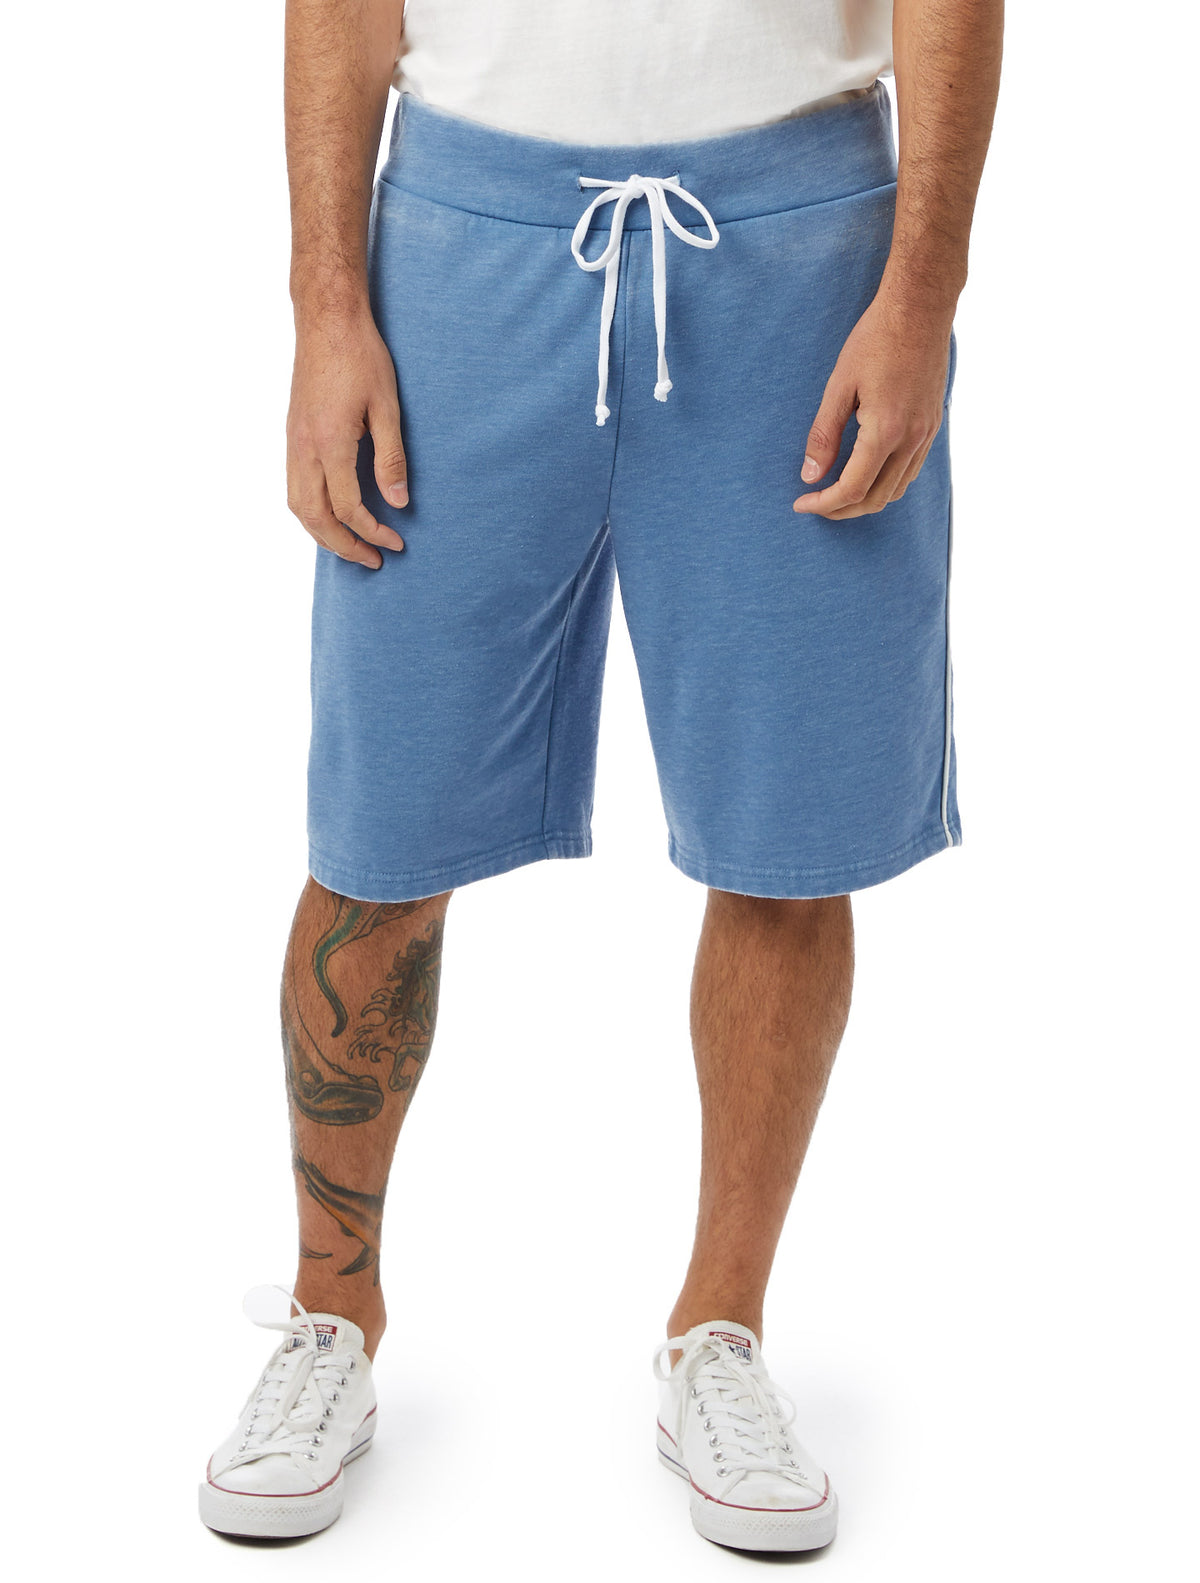 New Bench French Terry Shorts for your dad or daddy! $17.99 each